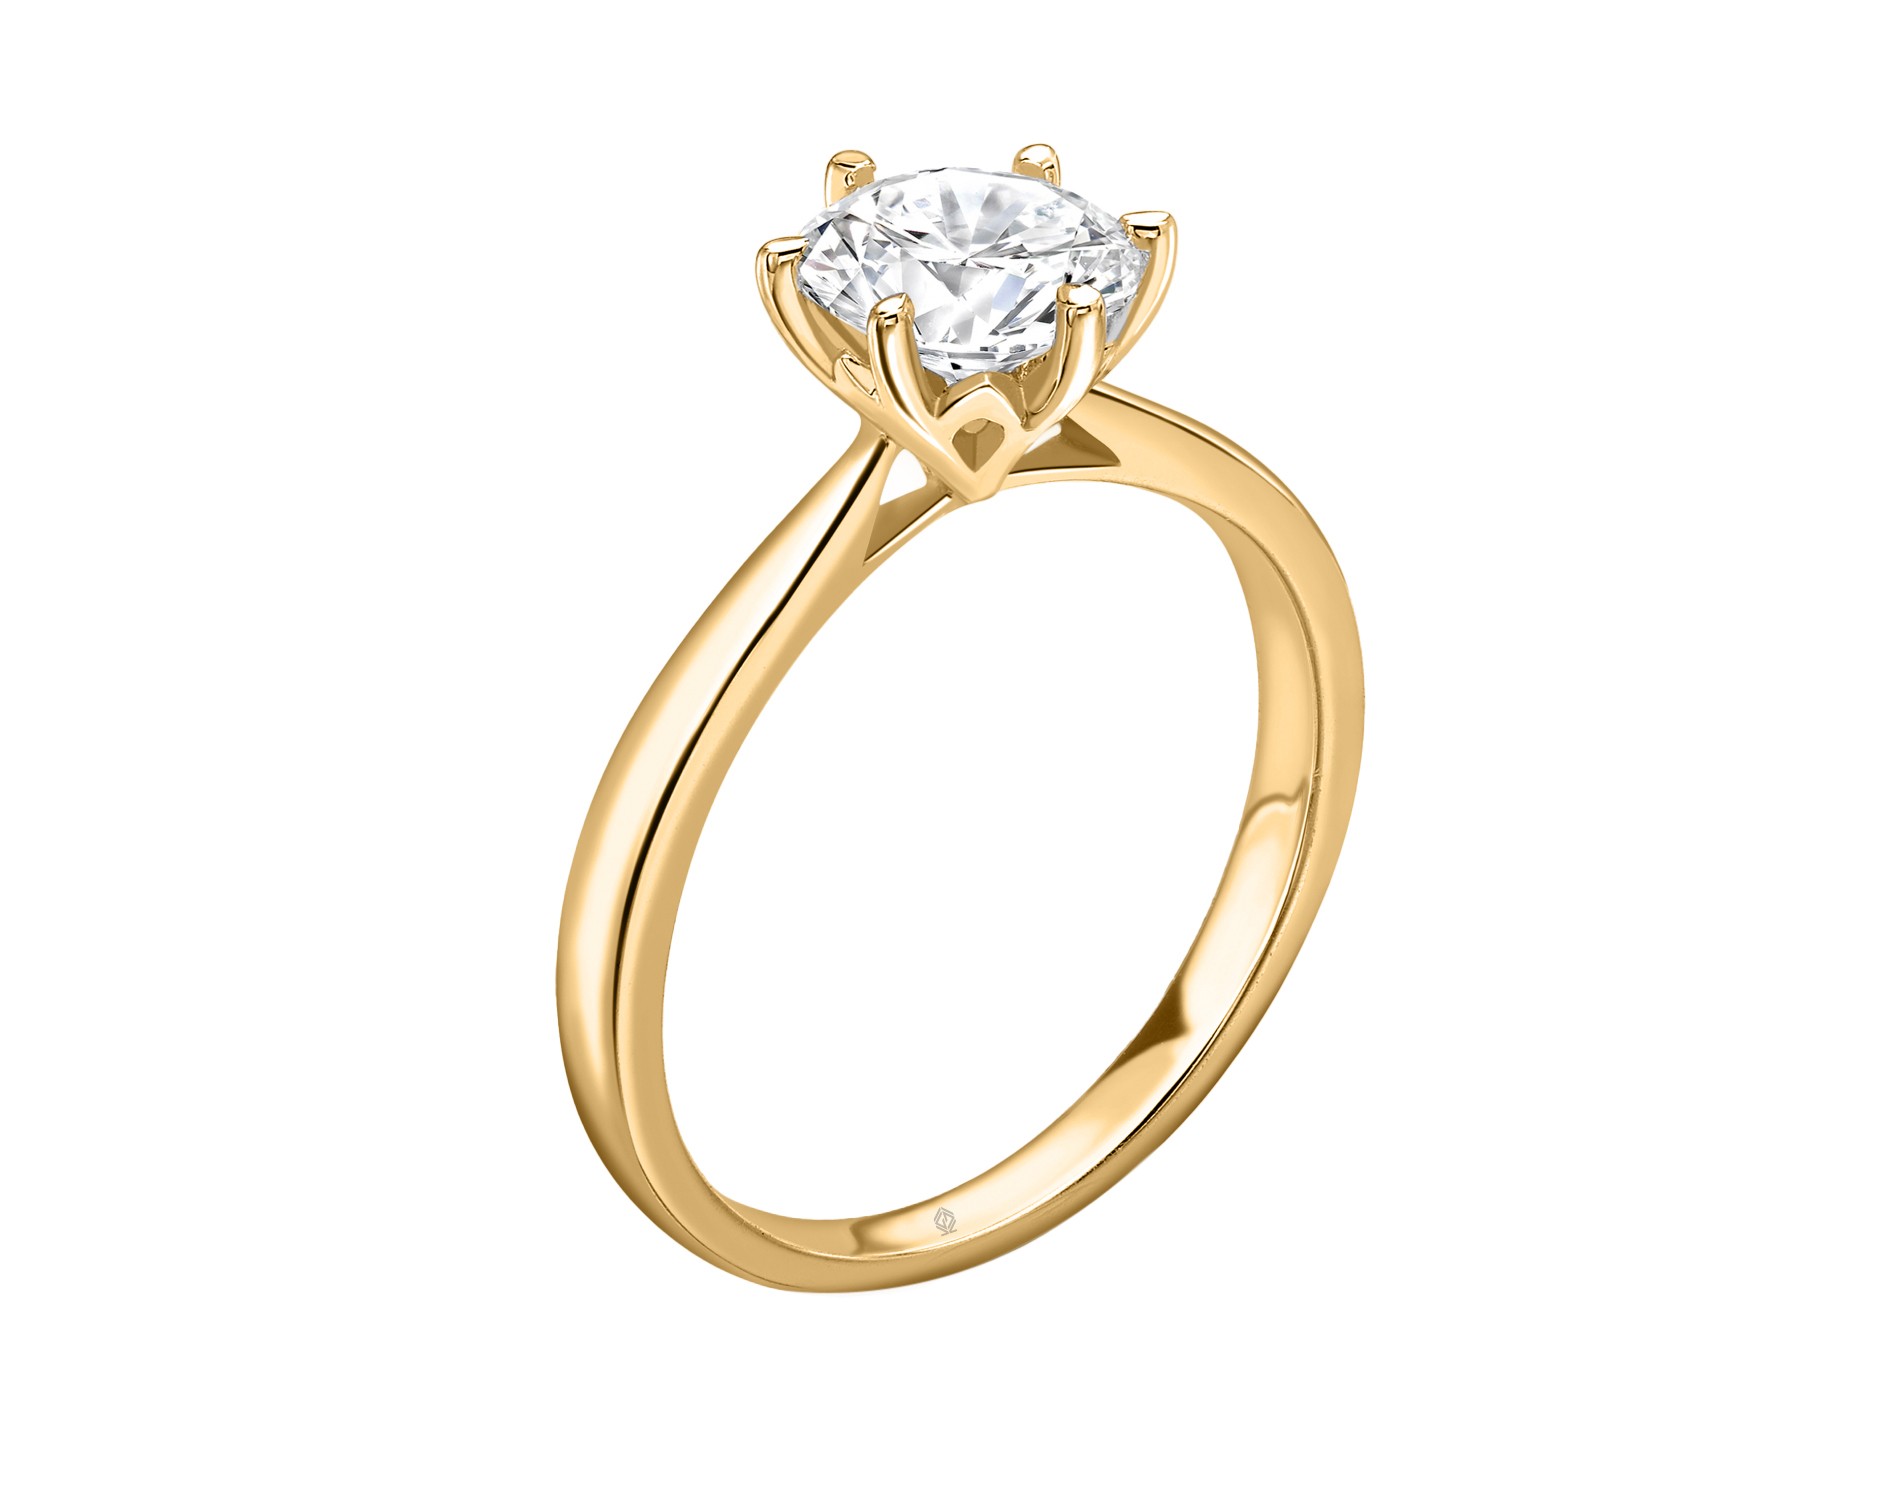 18K YELLOW GOLD 6 PRONGS HEAD SOLITAIRE ROUND CUT DIAMOND ENGAGEMENT RING